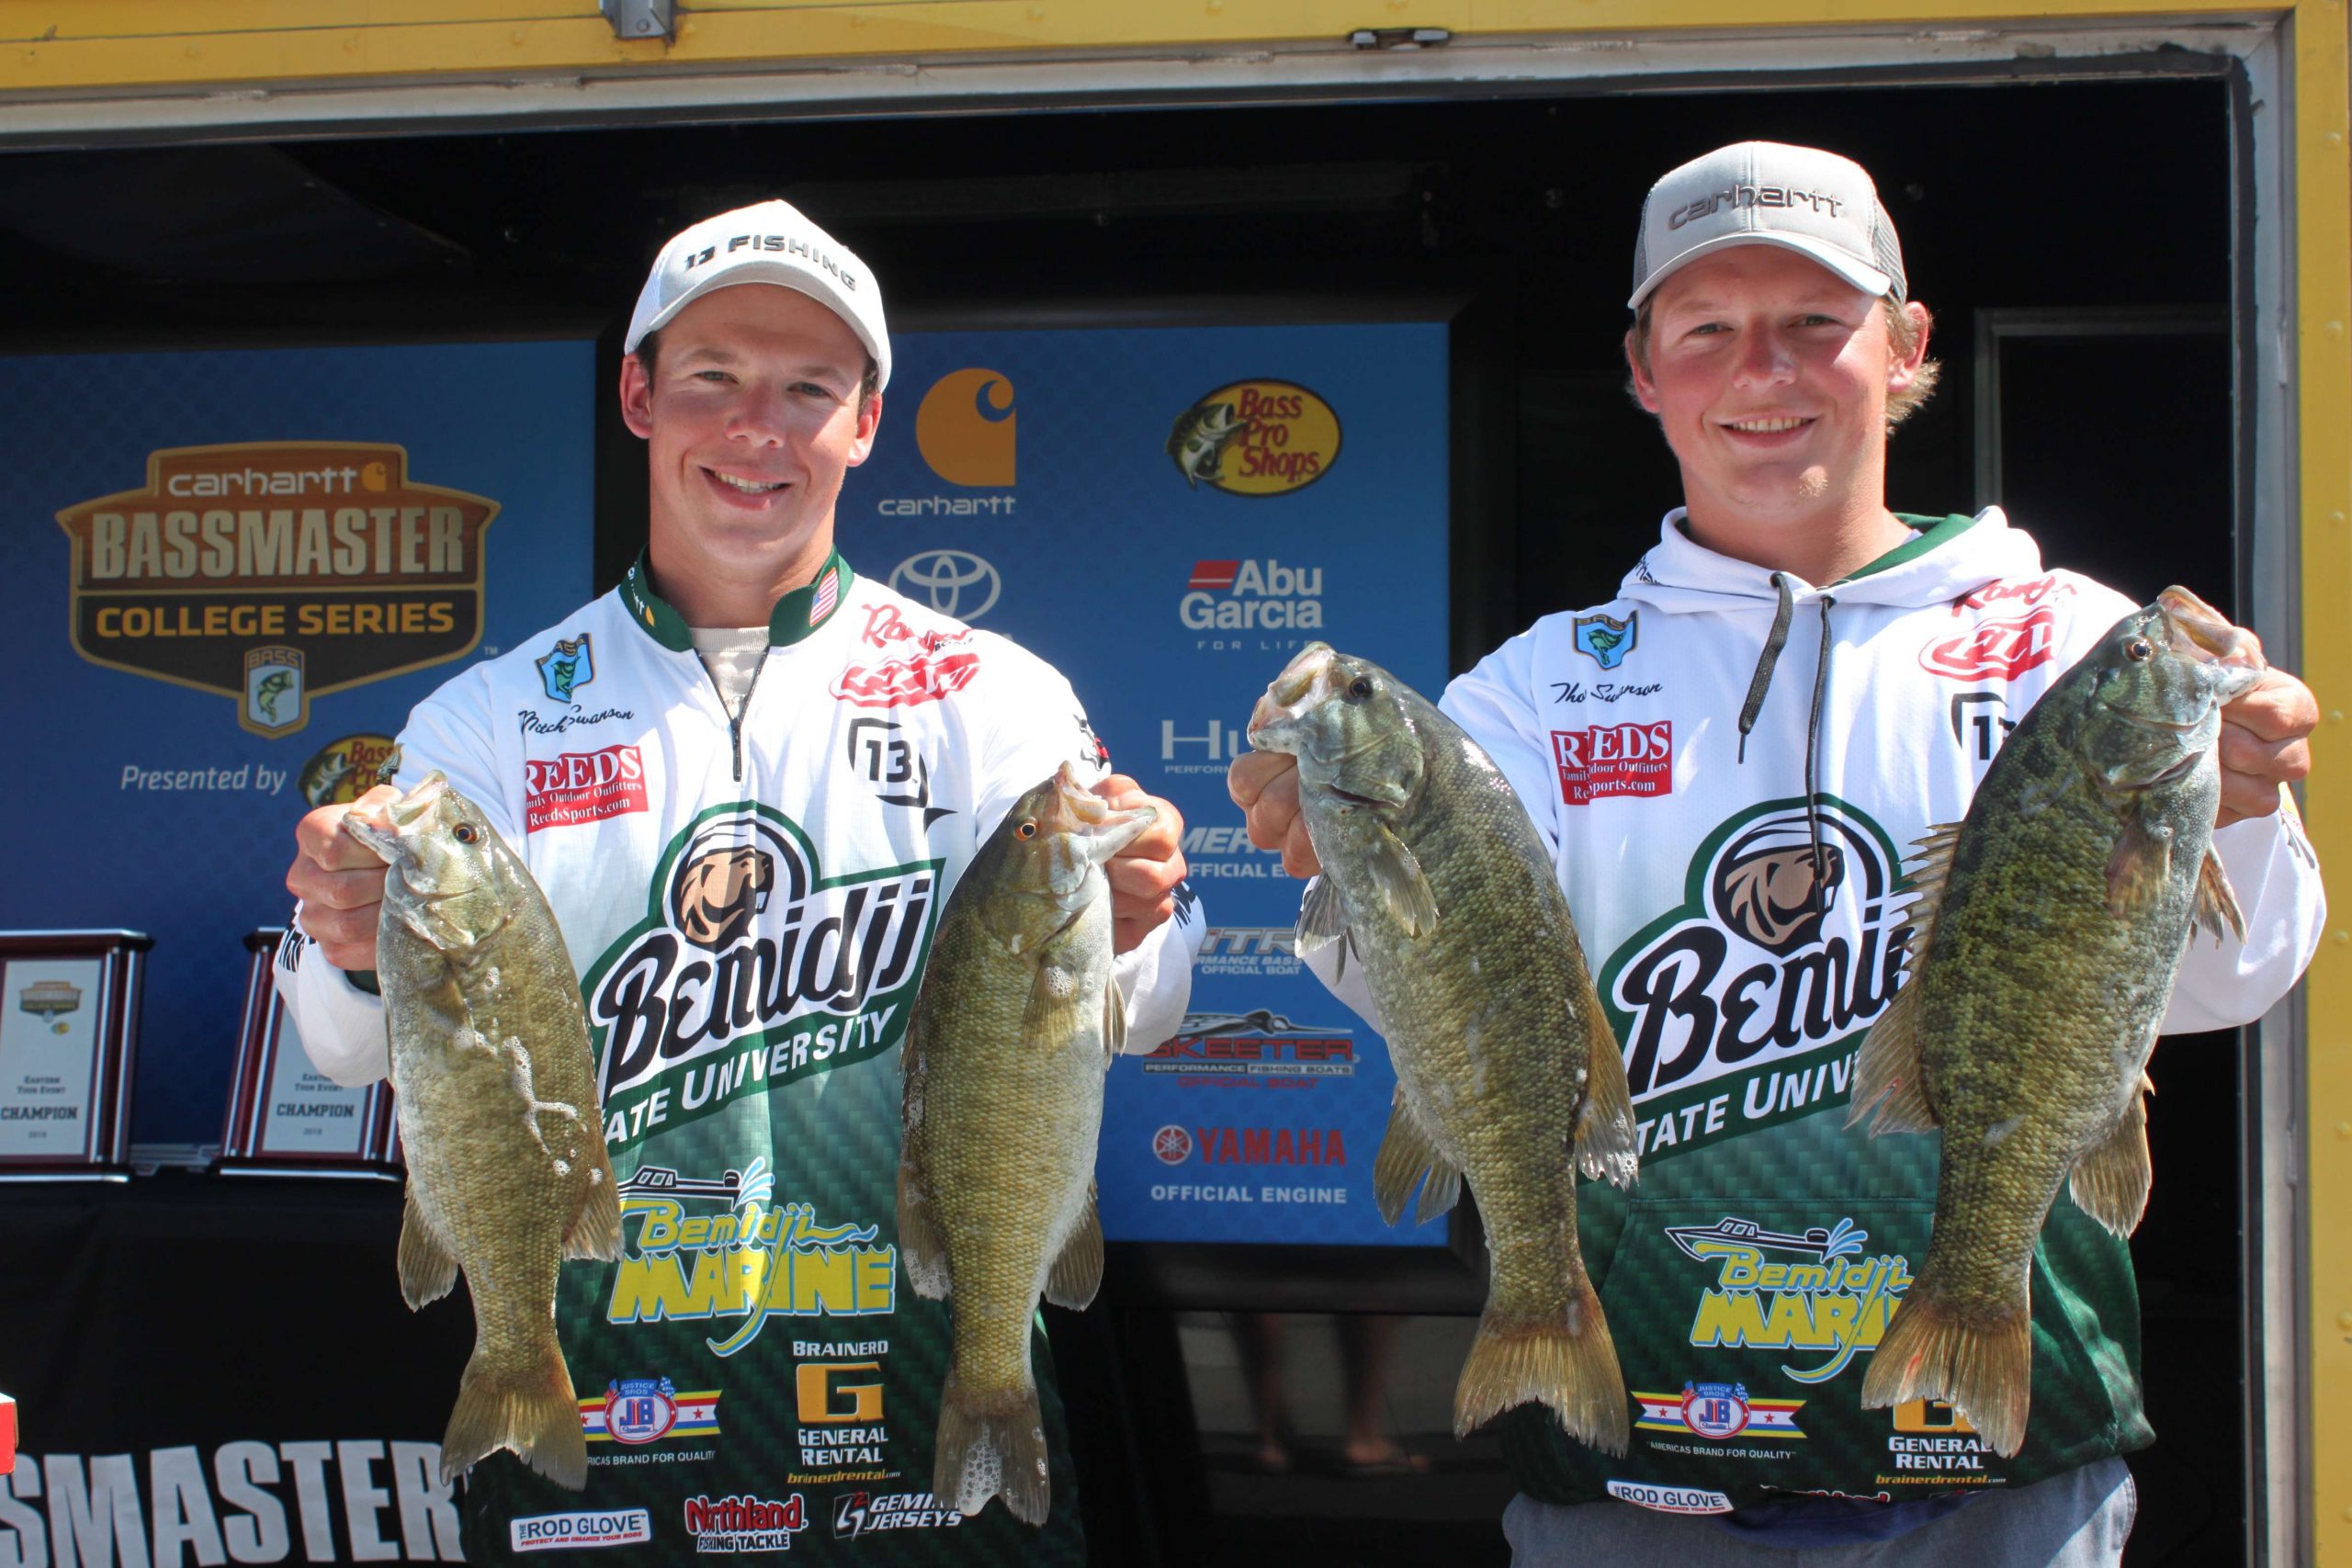 Thor and Mitch Swanson of Bemidji State University placed 24th with 33-10.